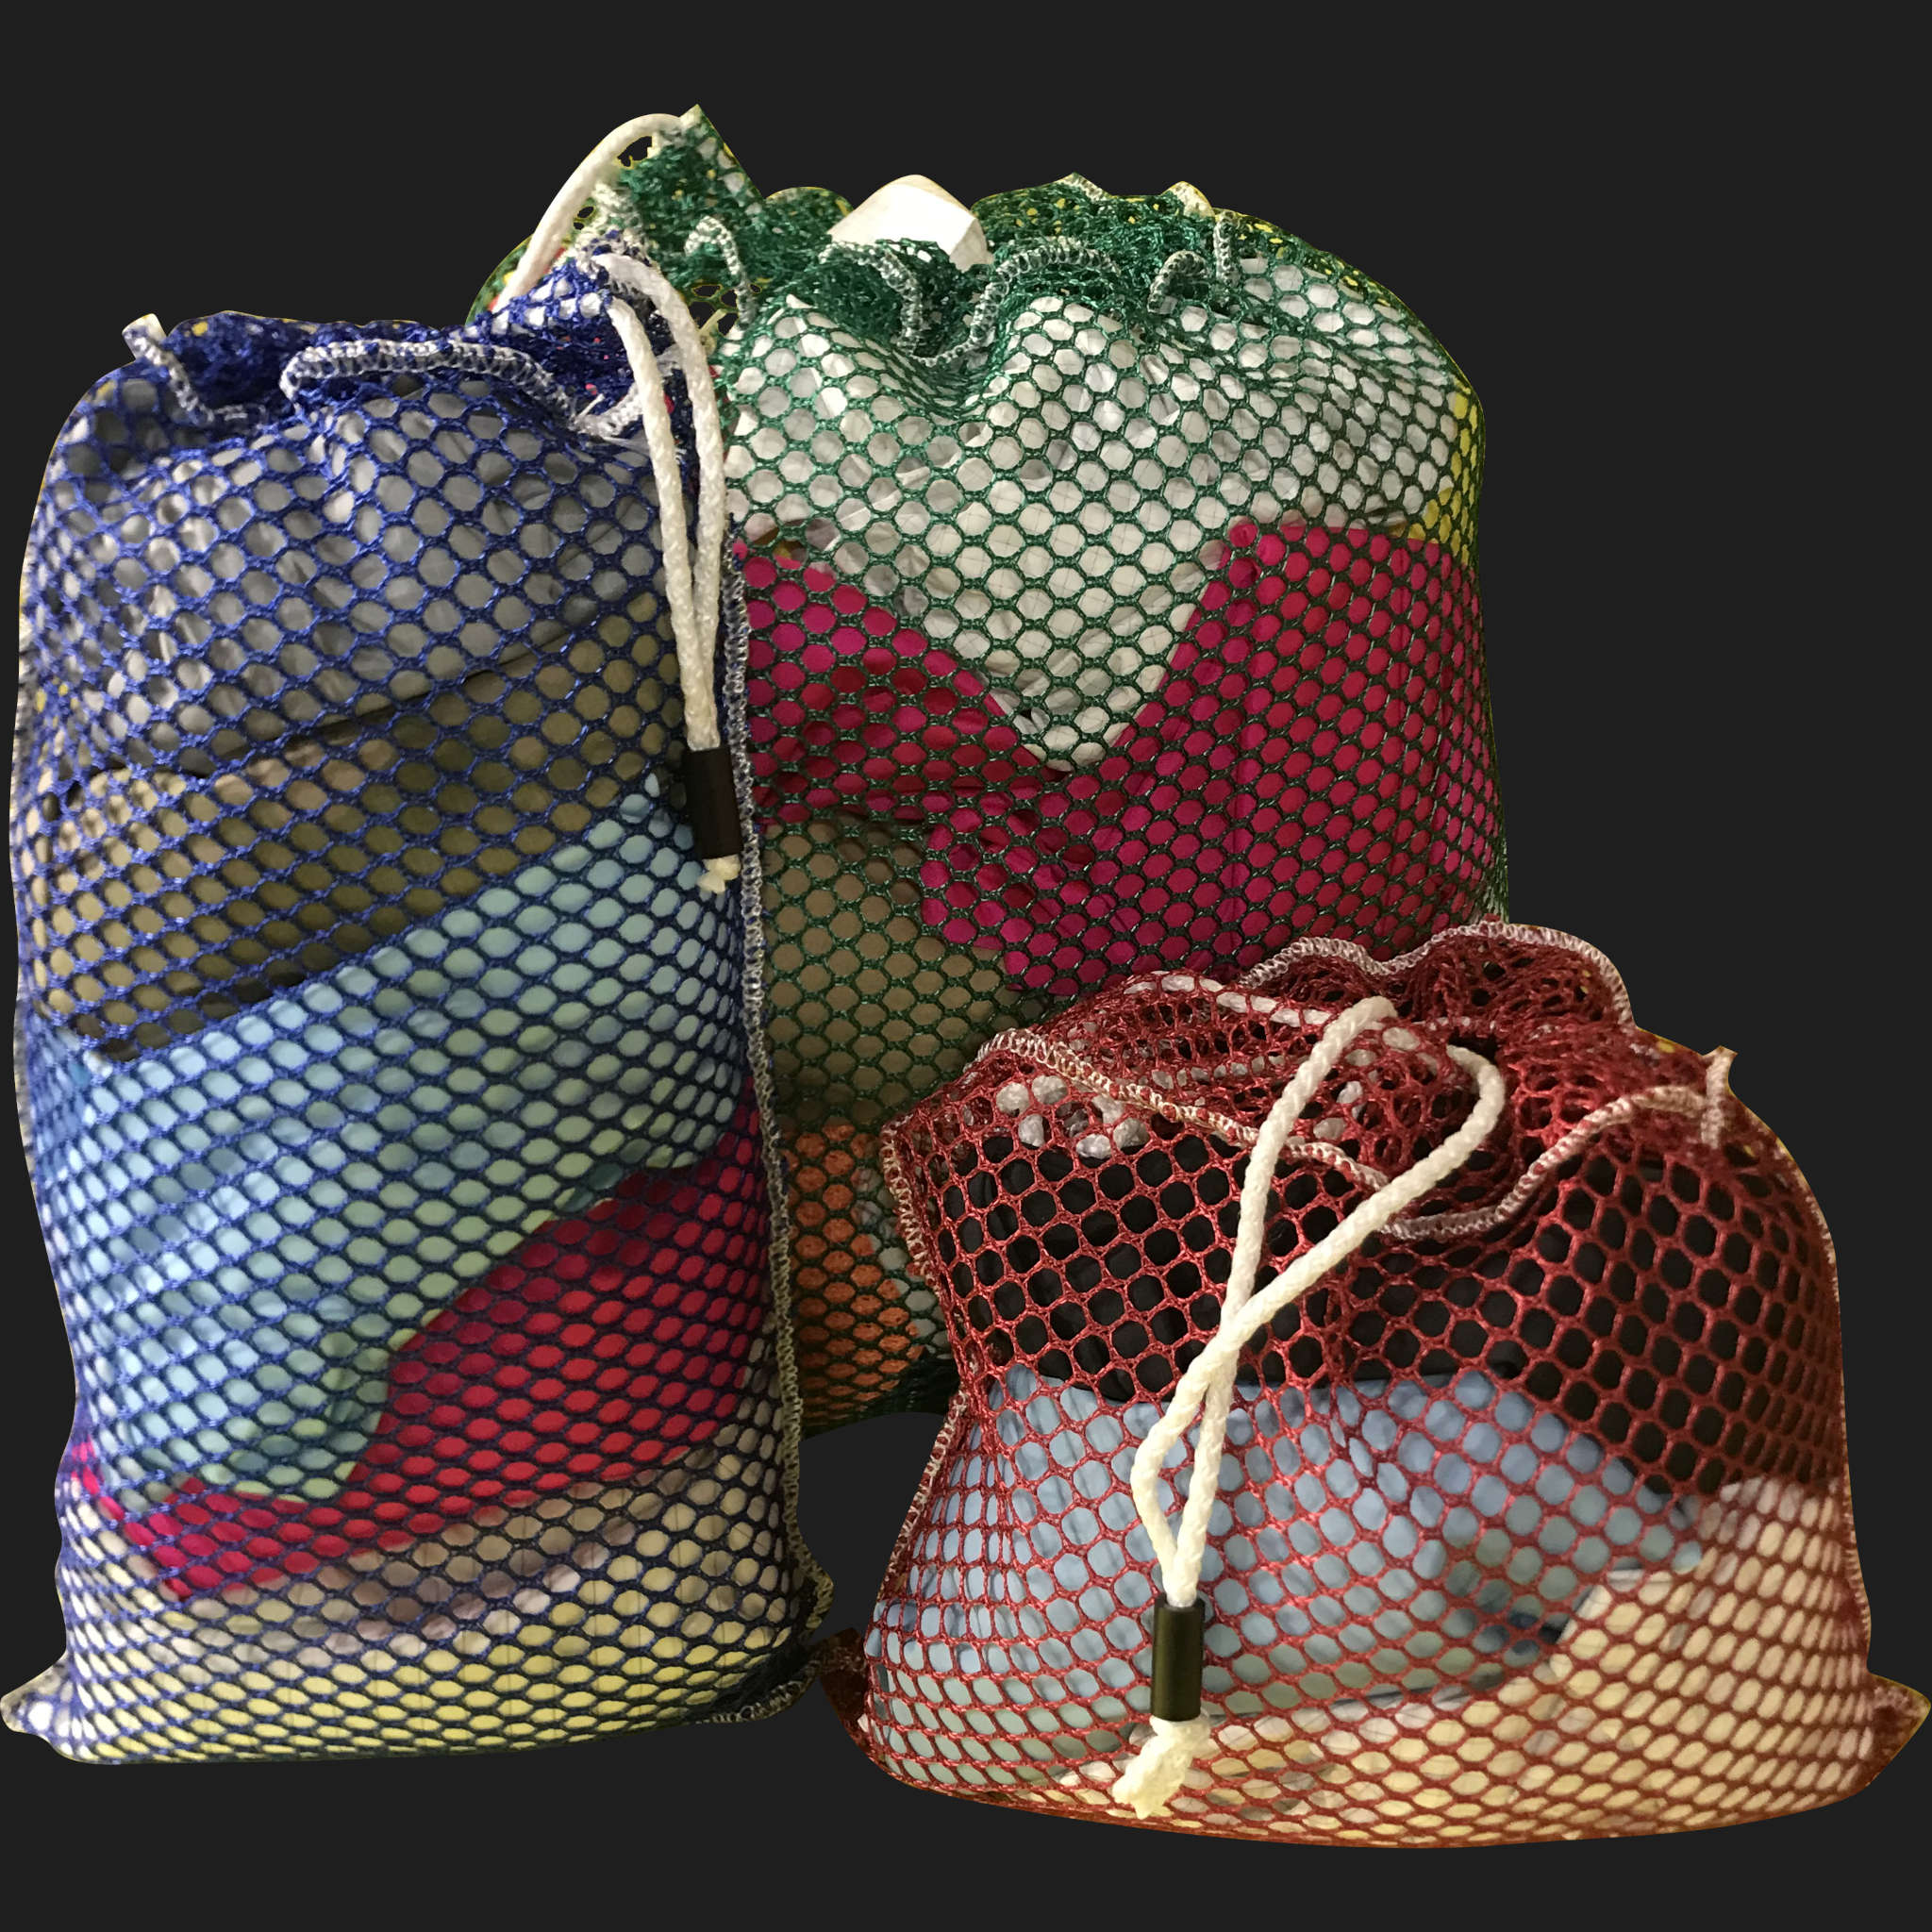 24" x 28" Customized Mesh-Net-Laundry Bags Heavy Duty with Cord and barrellock closure